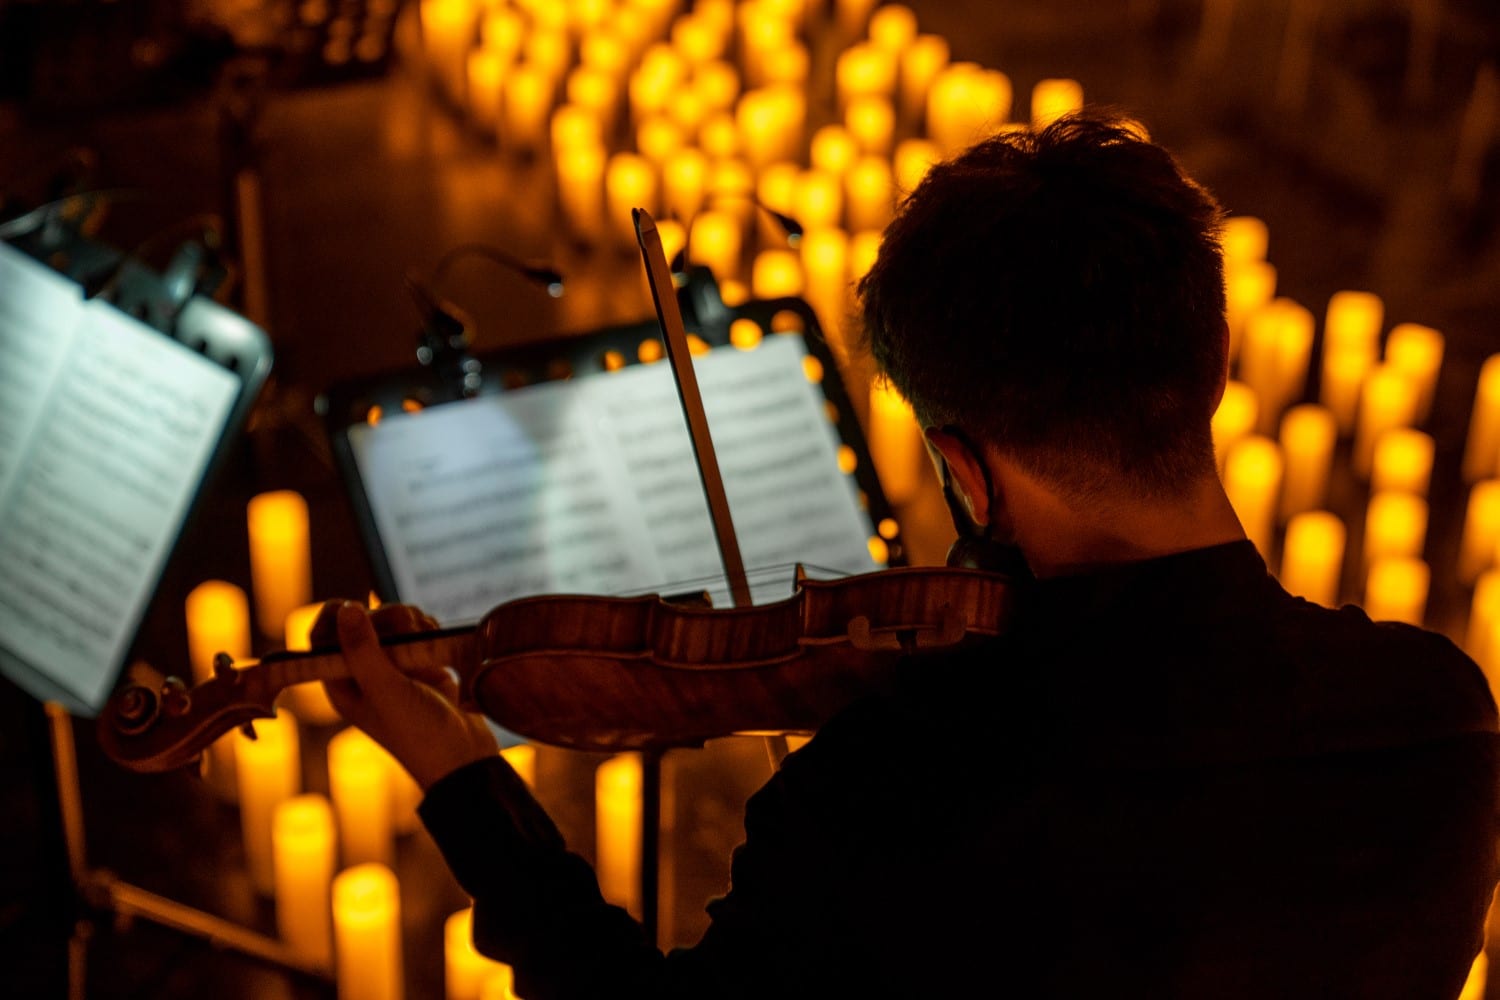 Violinist playing music surrounded by glowing candles